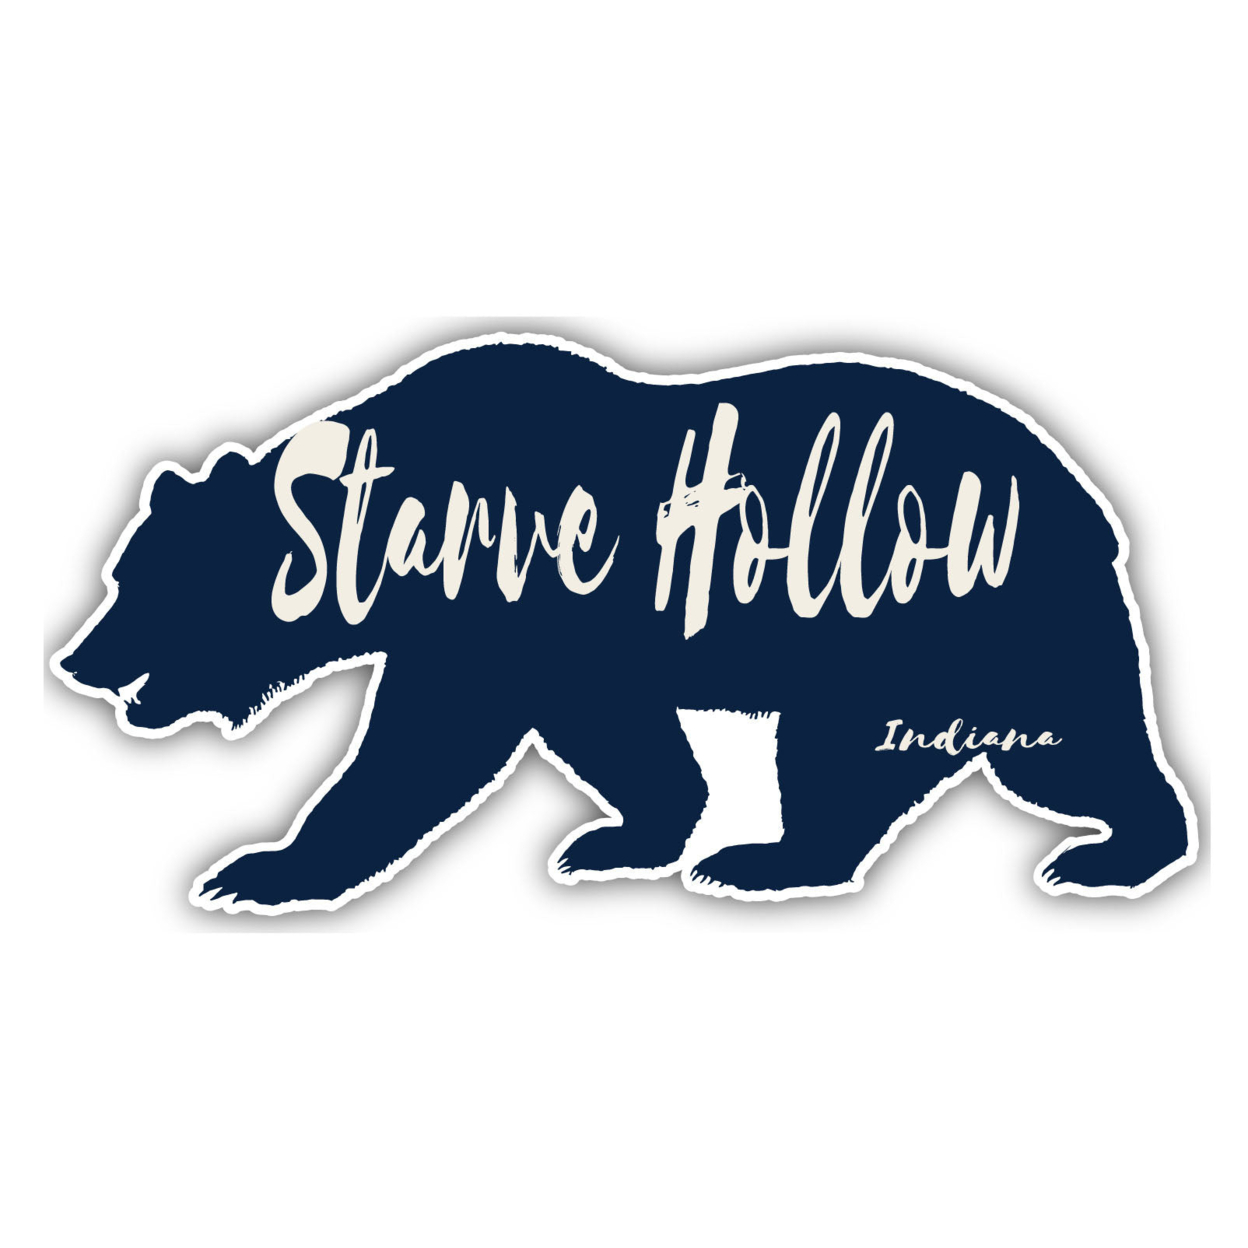 Starve Hollow Indiana Souvenir Decorative Stickers (Choose Theme And Size) - Single Unit, 2-Inch, Great Outdoors